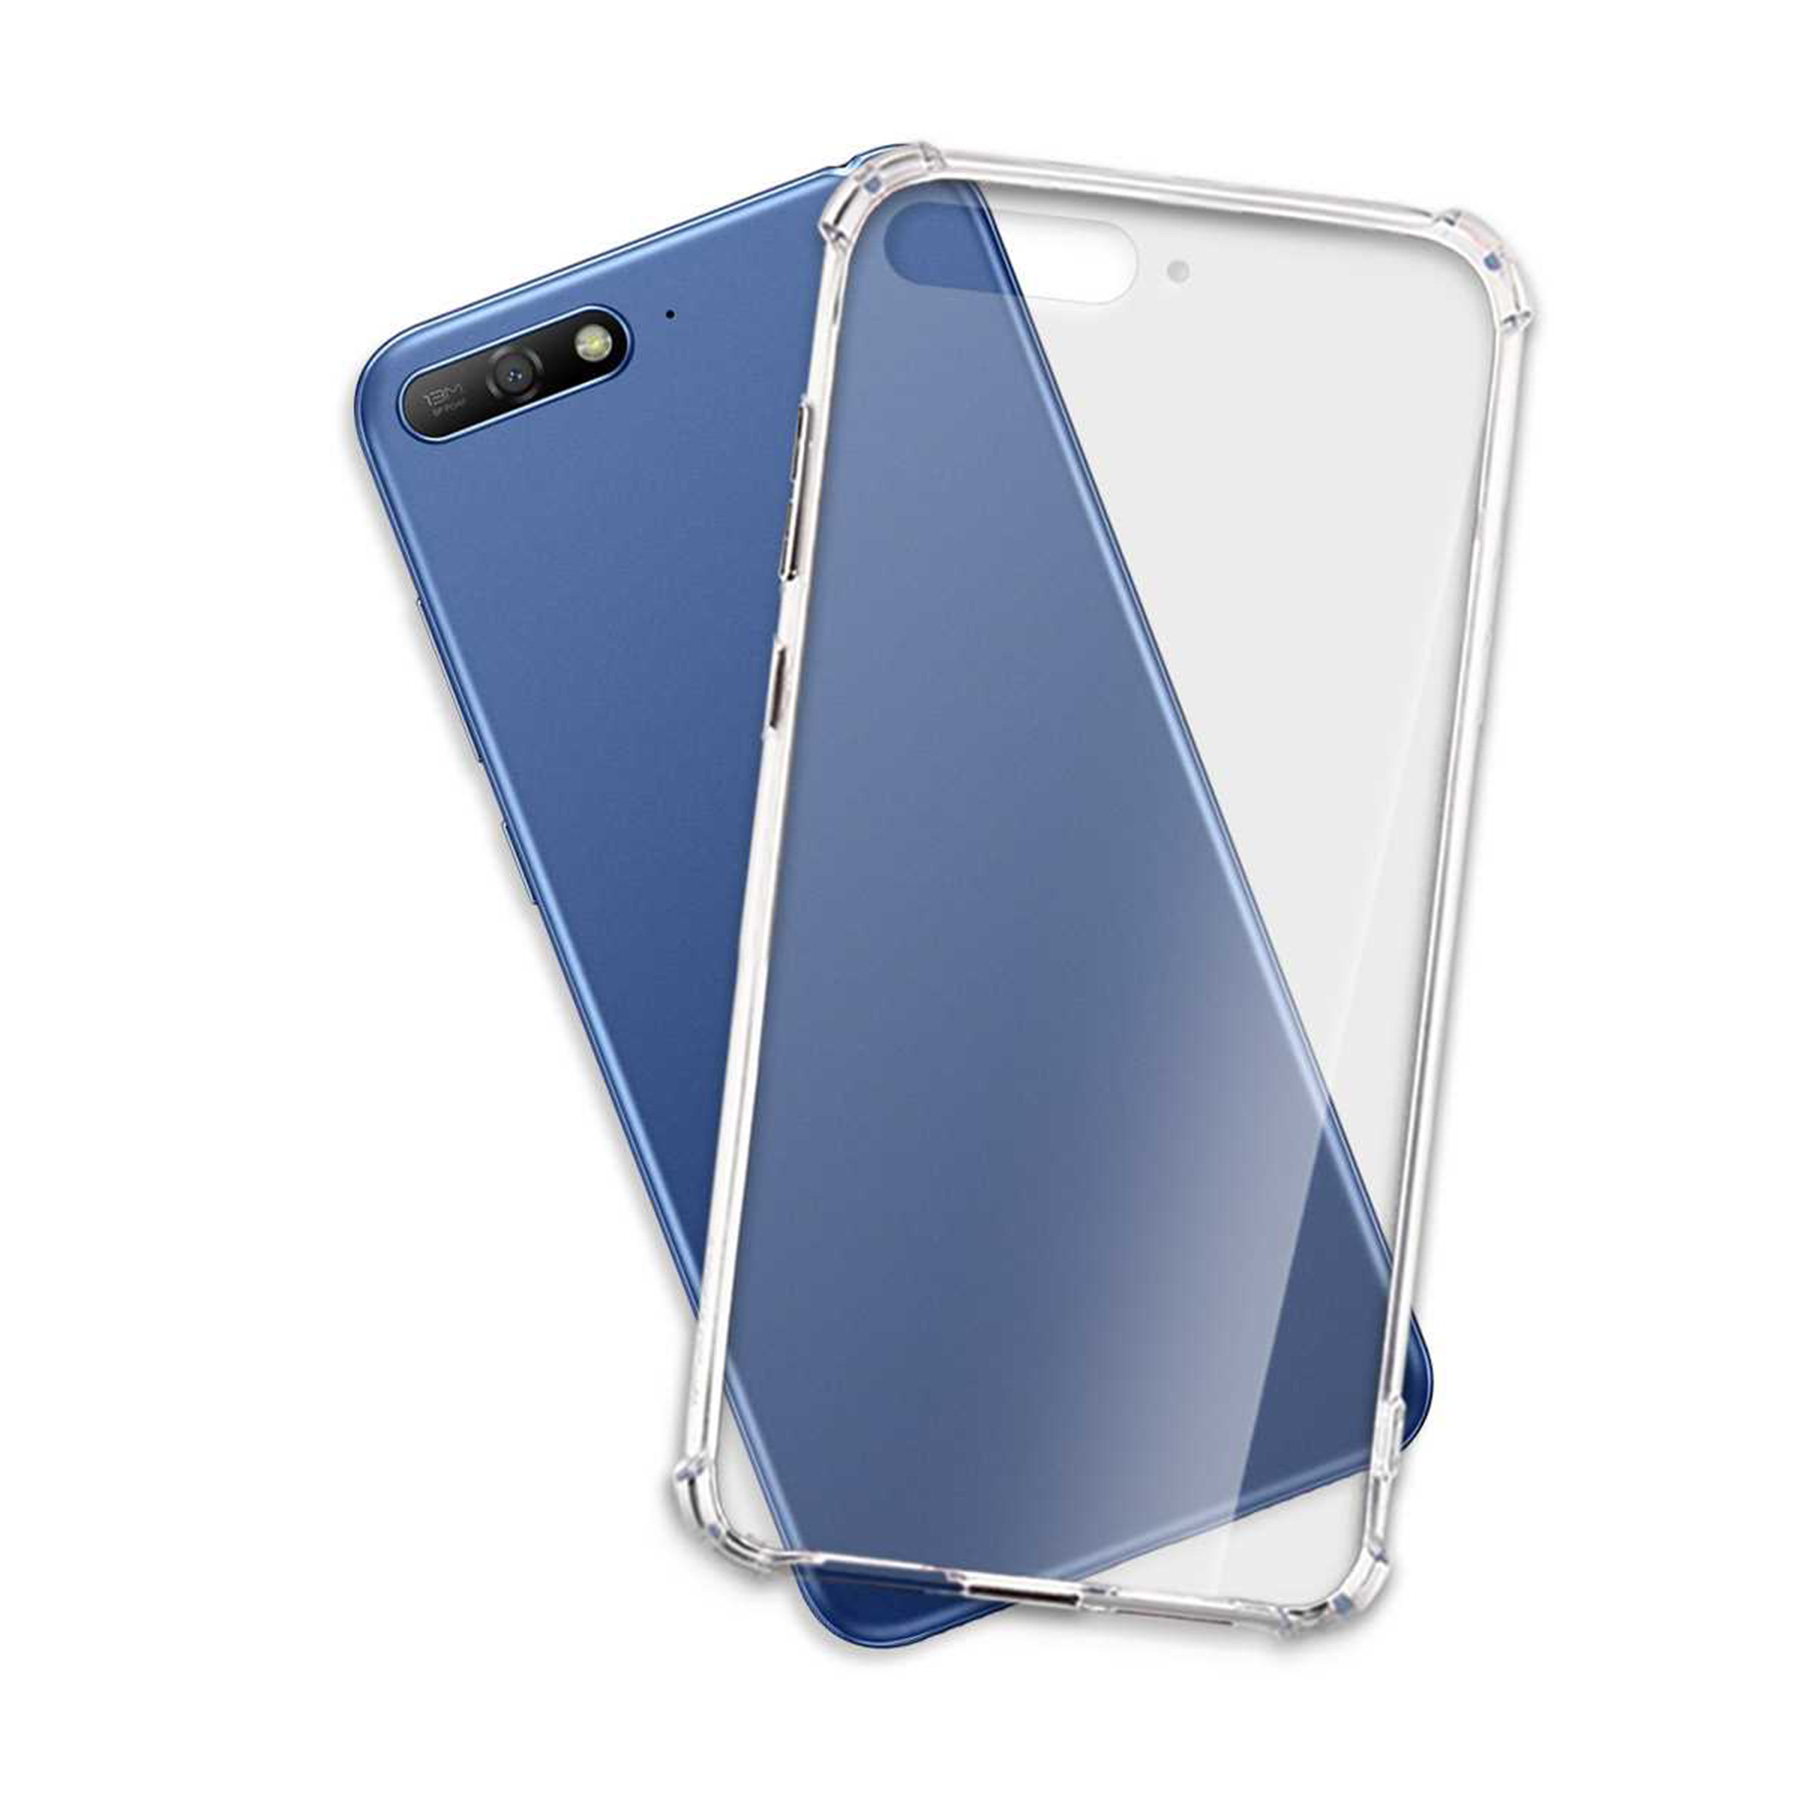 Transparent Y6 MORE MTB 2018, Clear Backcover, ENERGY Case, Huawei, Armor